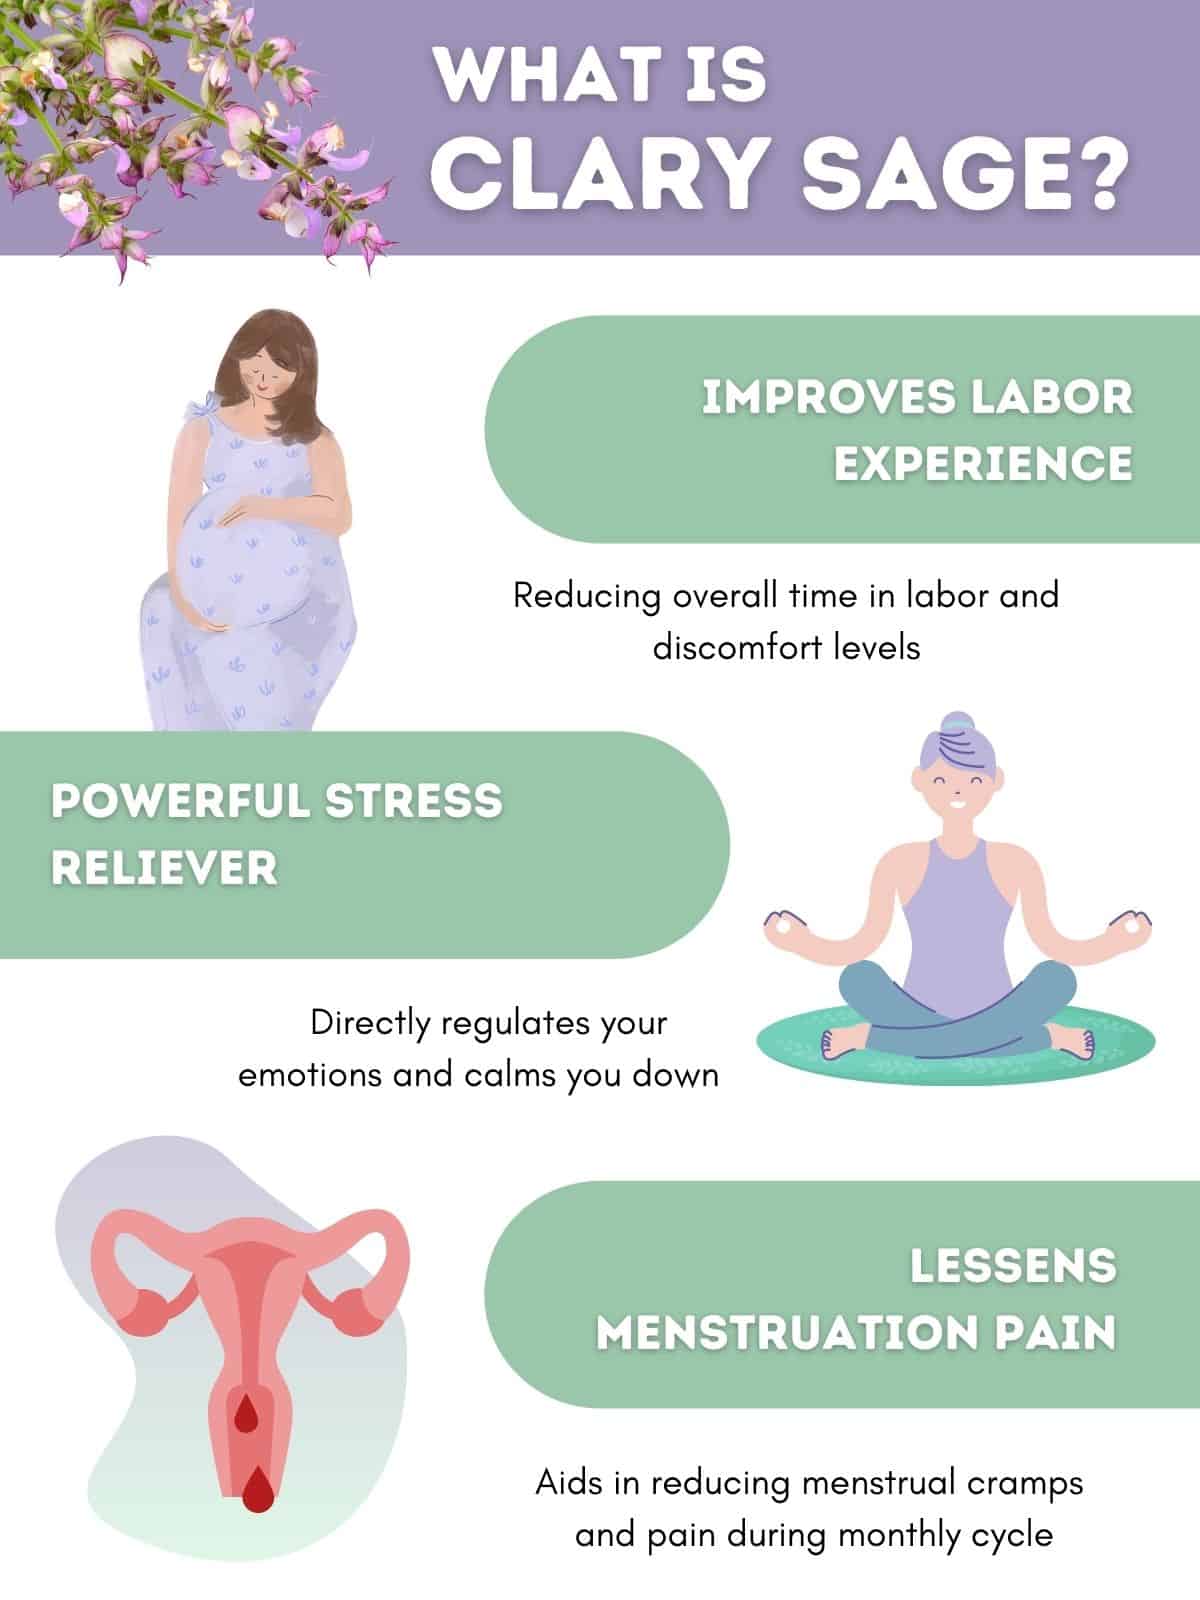 Graphic explaining what clary sage is and its benefits.